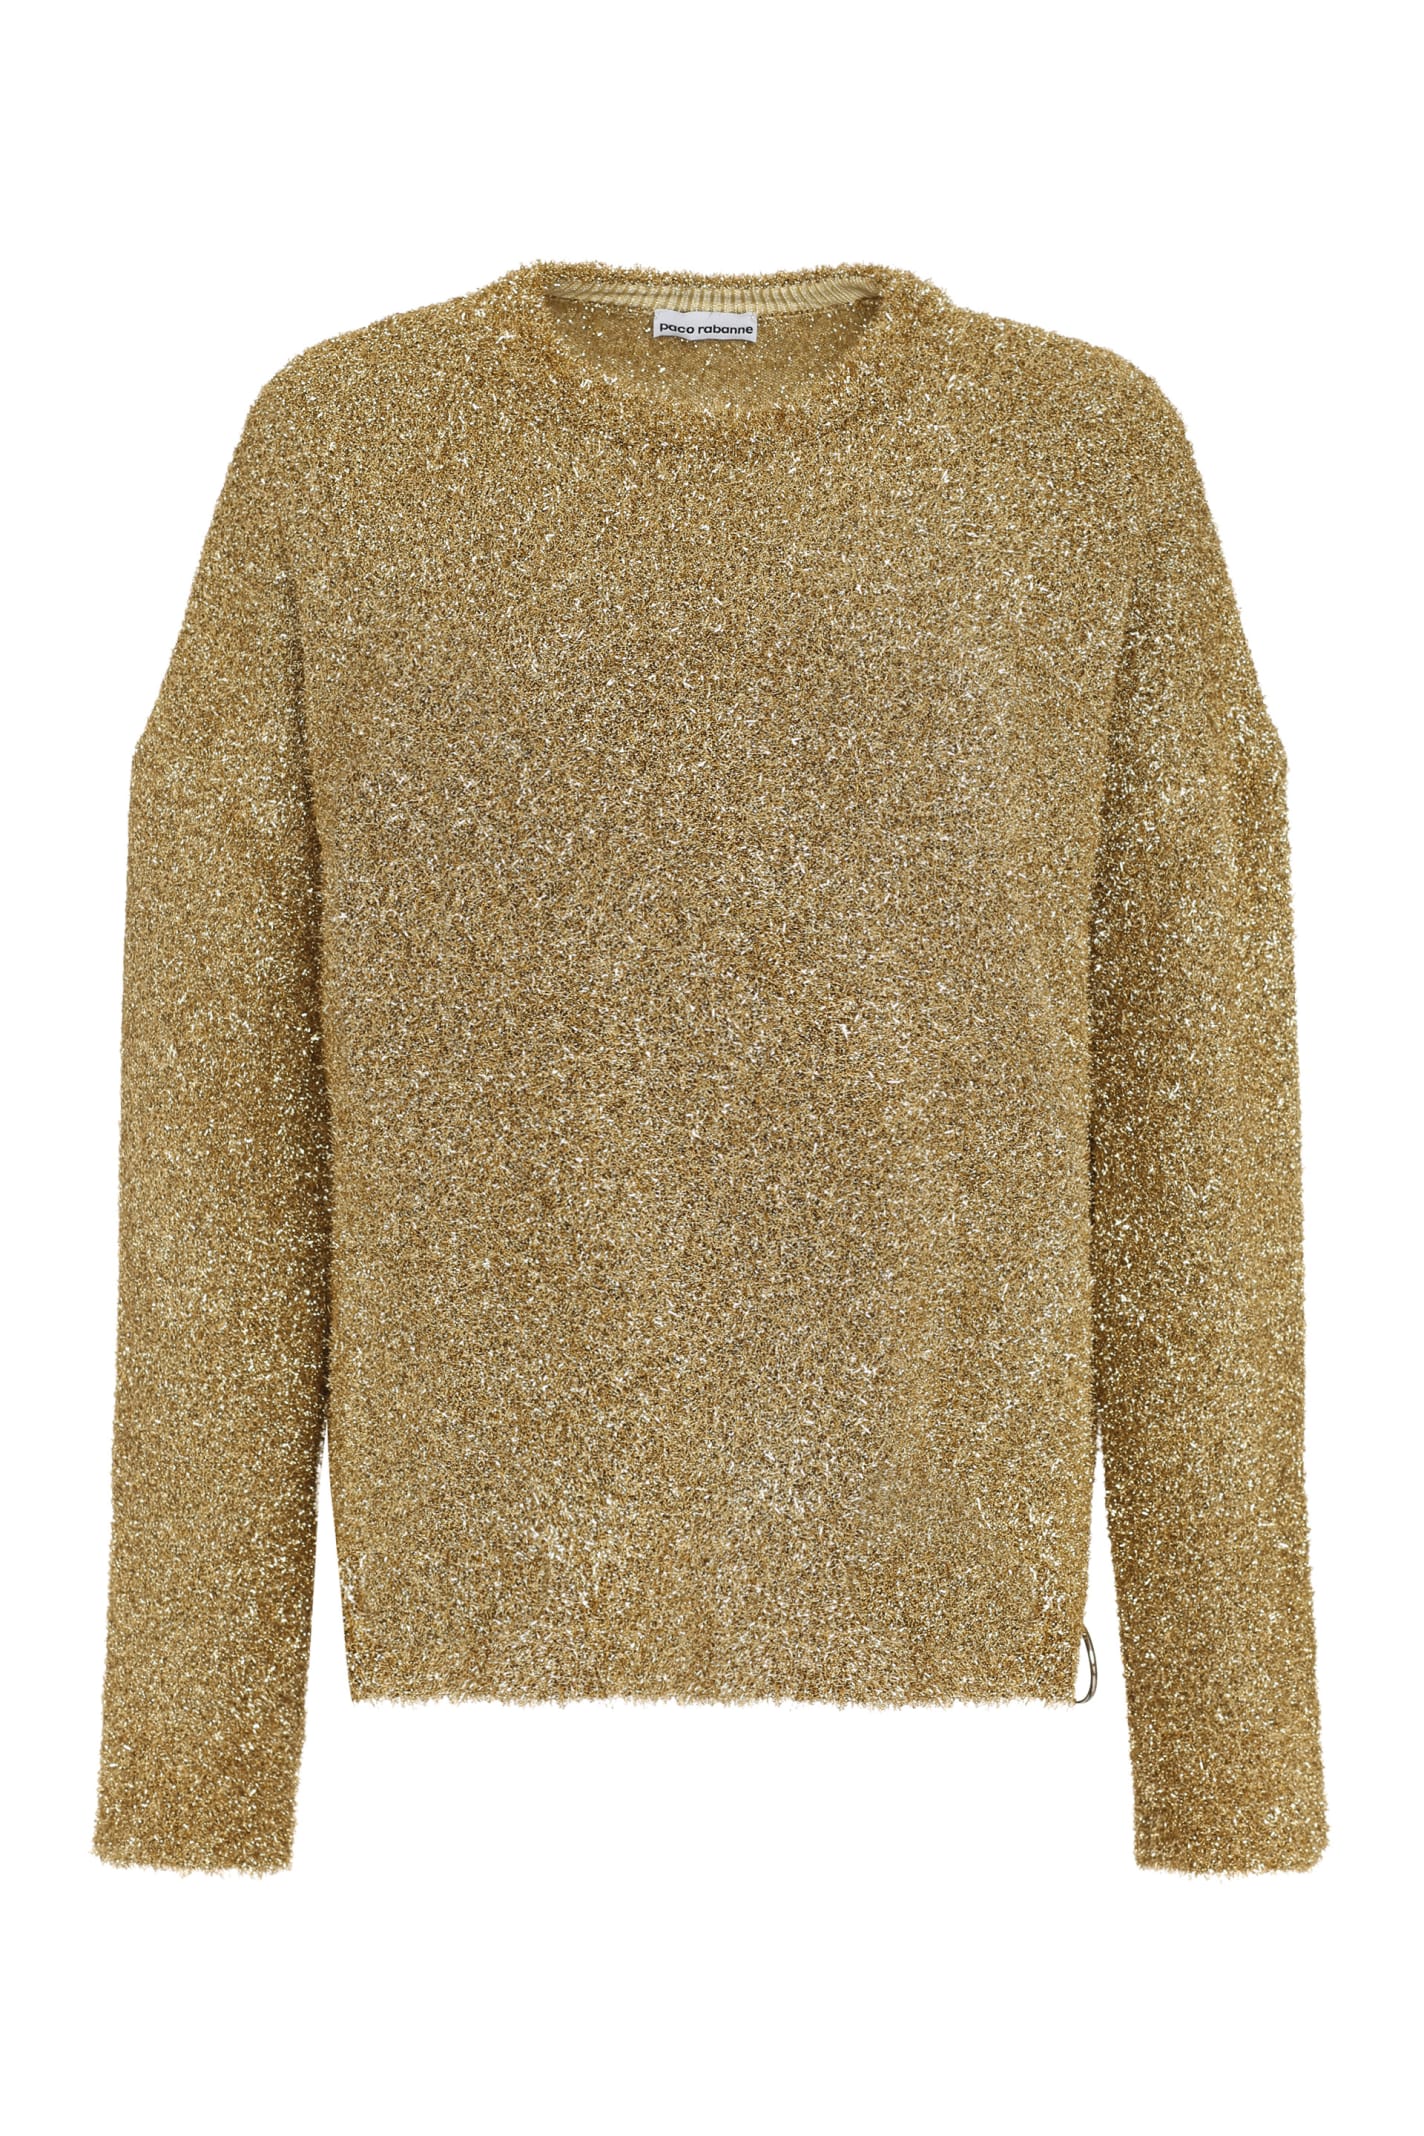 Paco Rabanne Long Sleeve Crew-neck Sweater In Gold